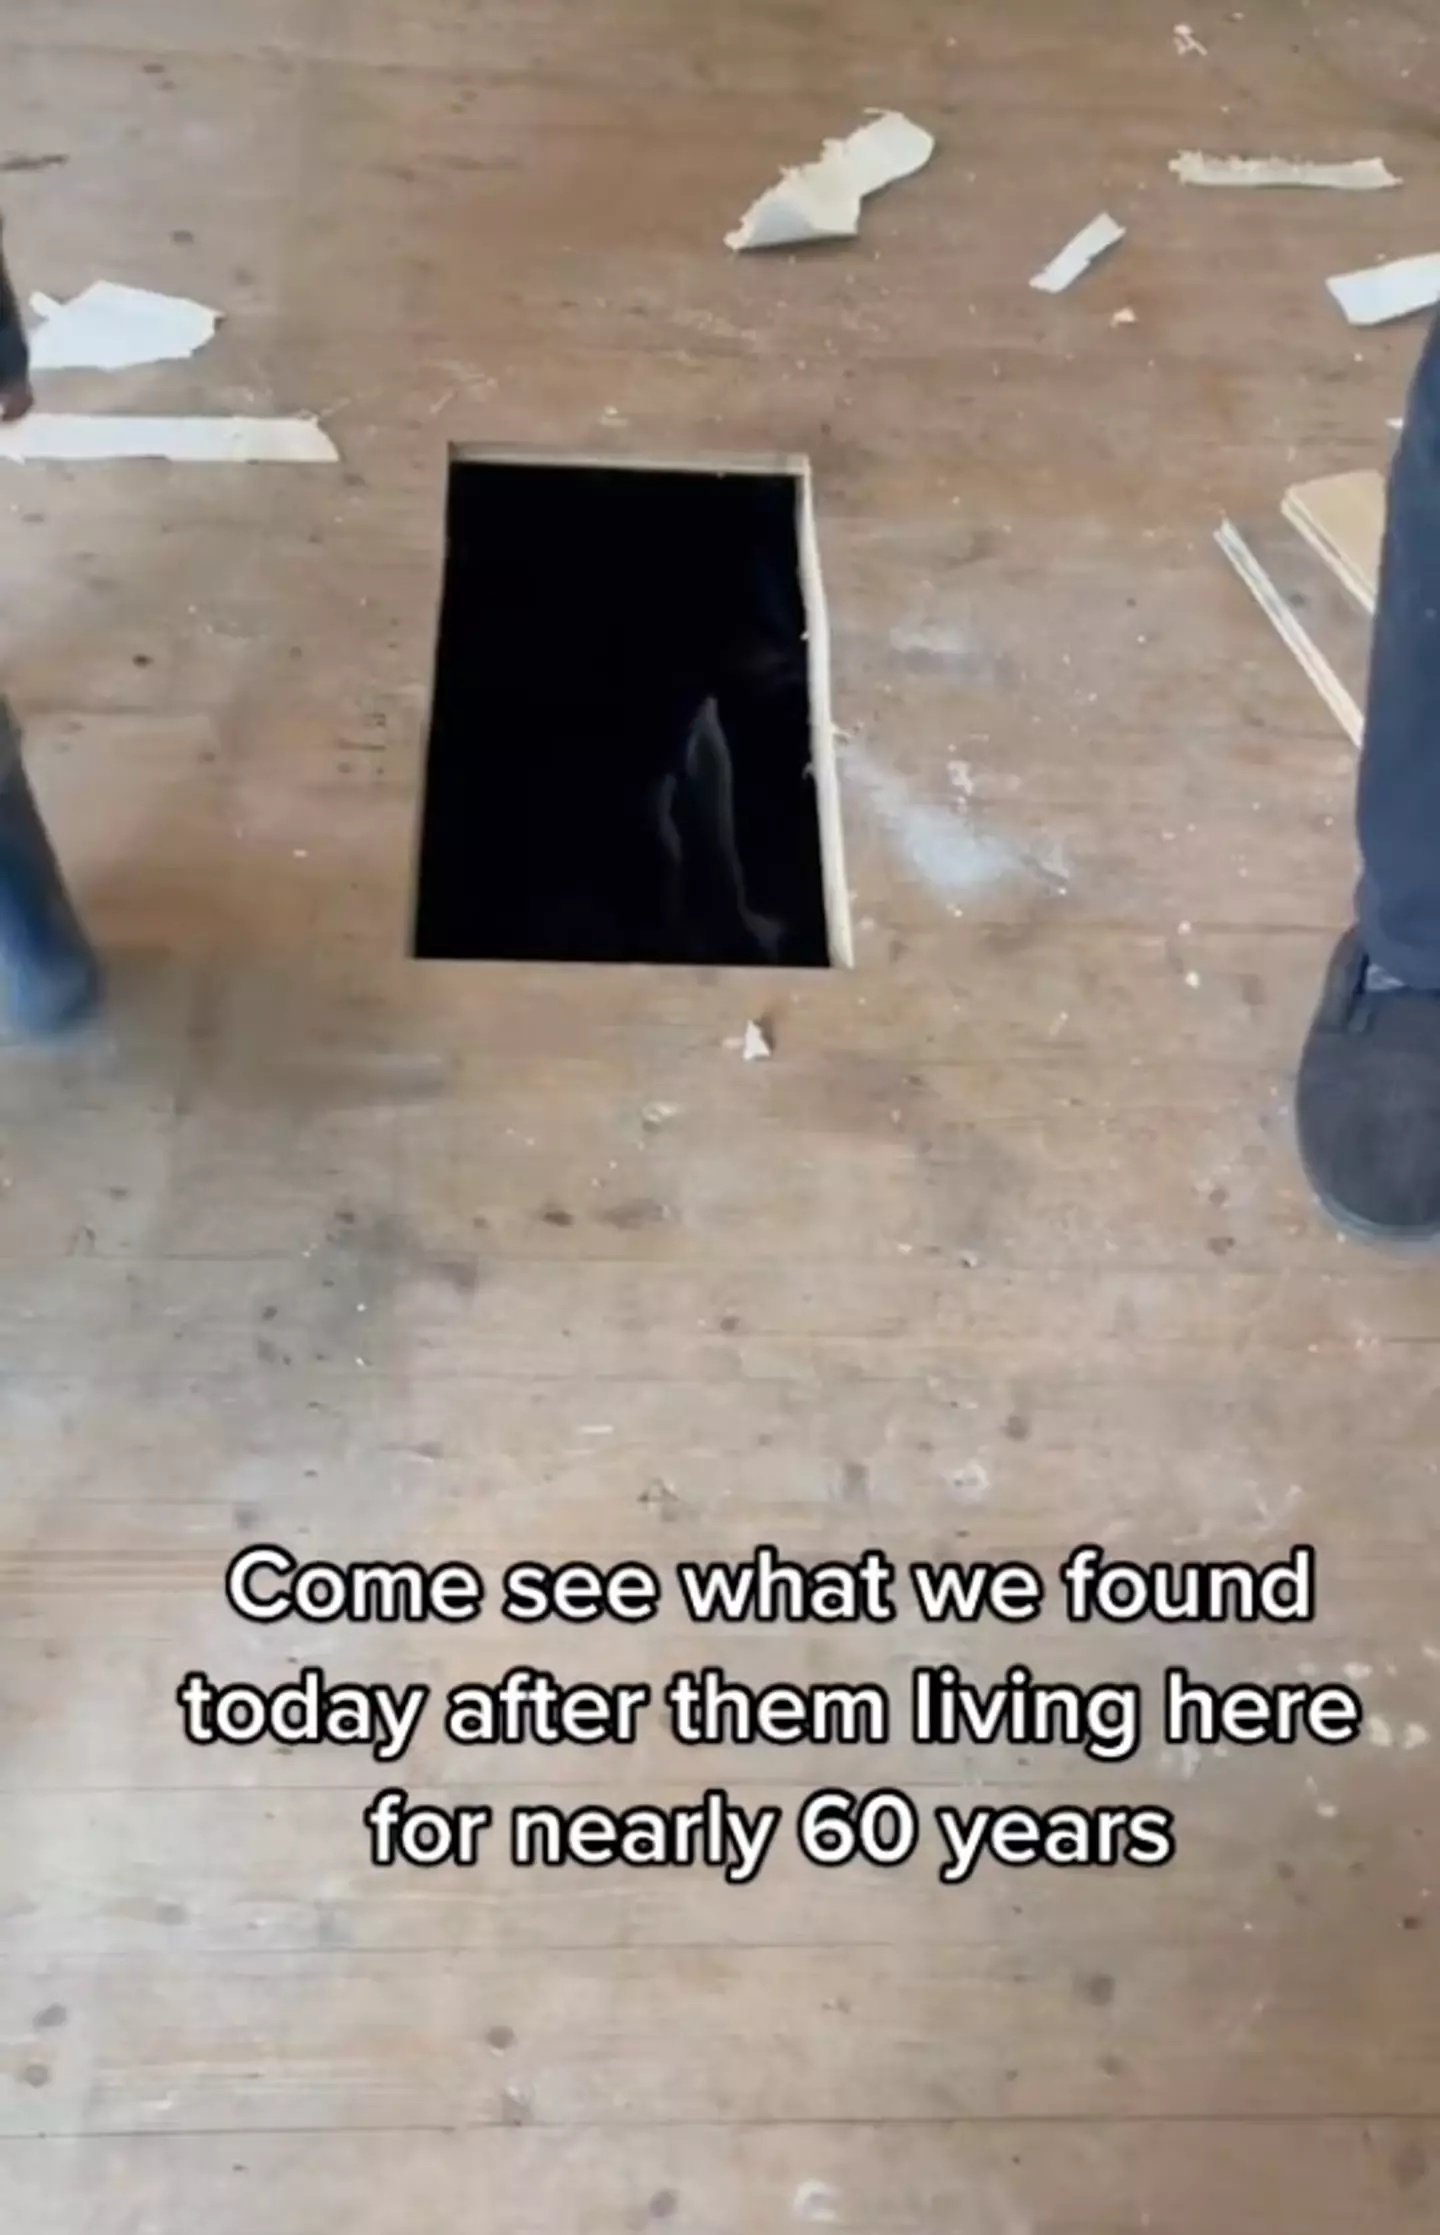 The TikTok user found a 'creepy' 200-year-old trap door in their parents' farm house.